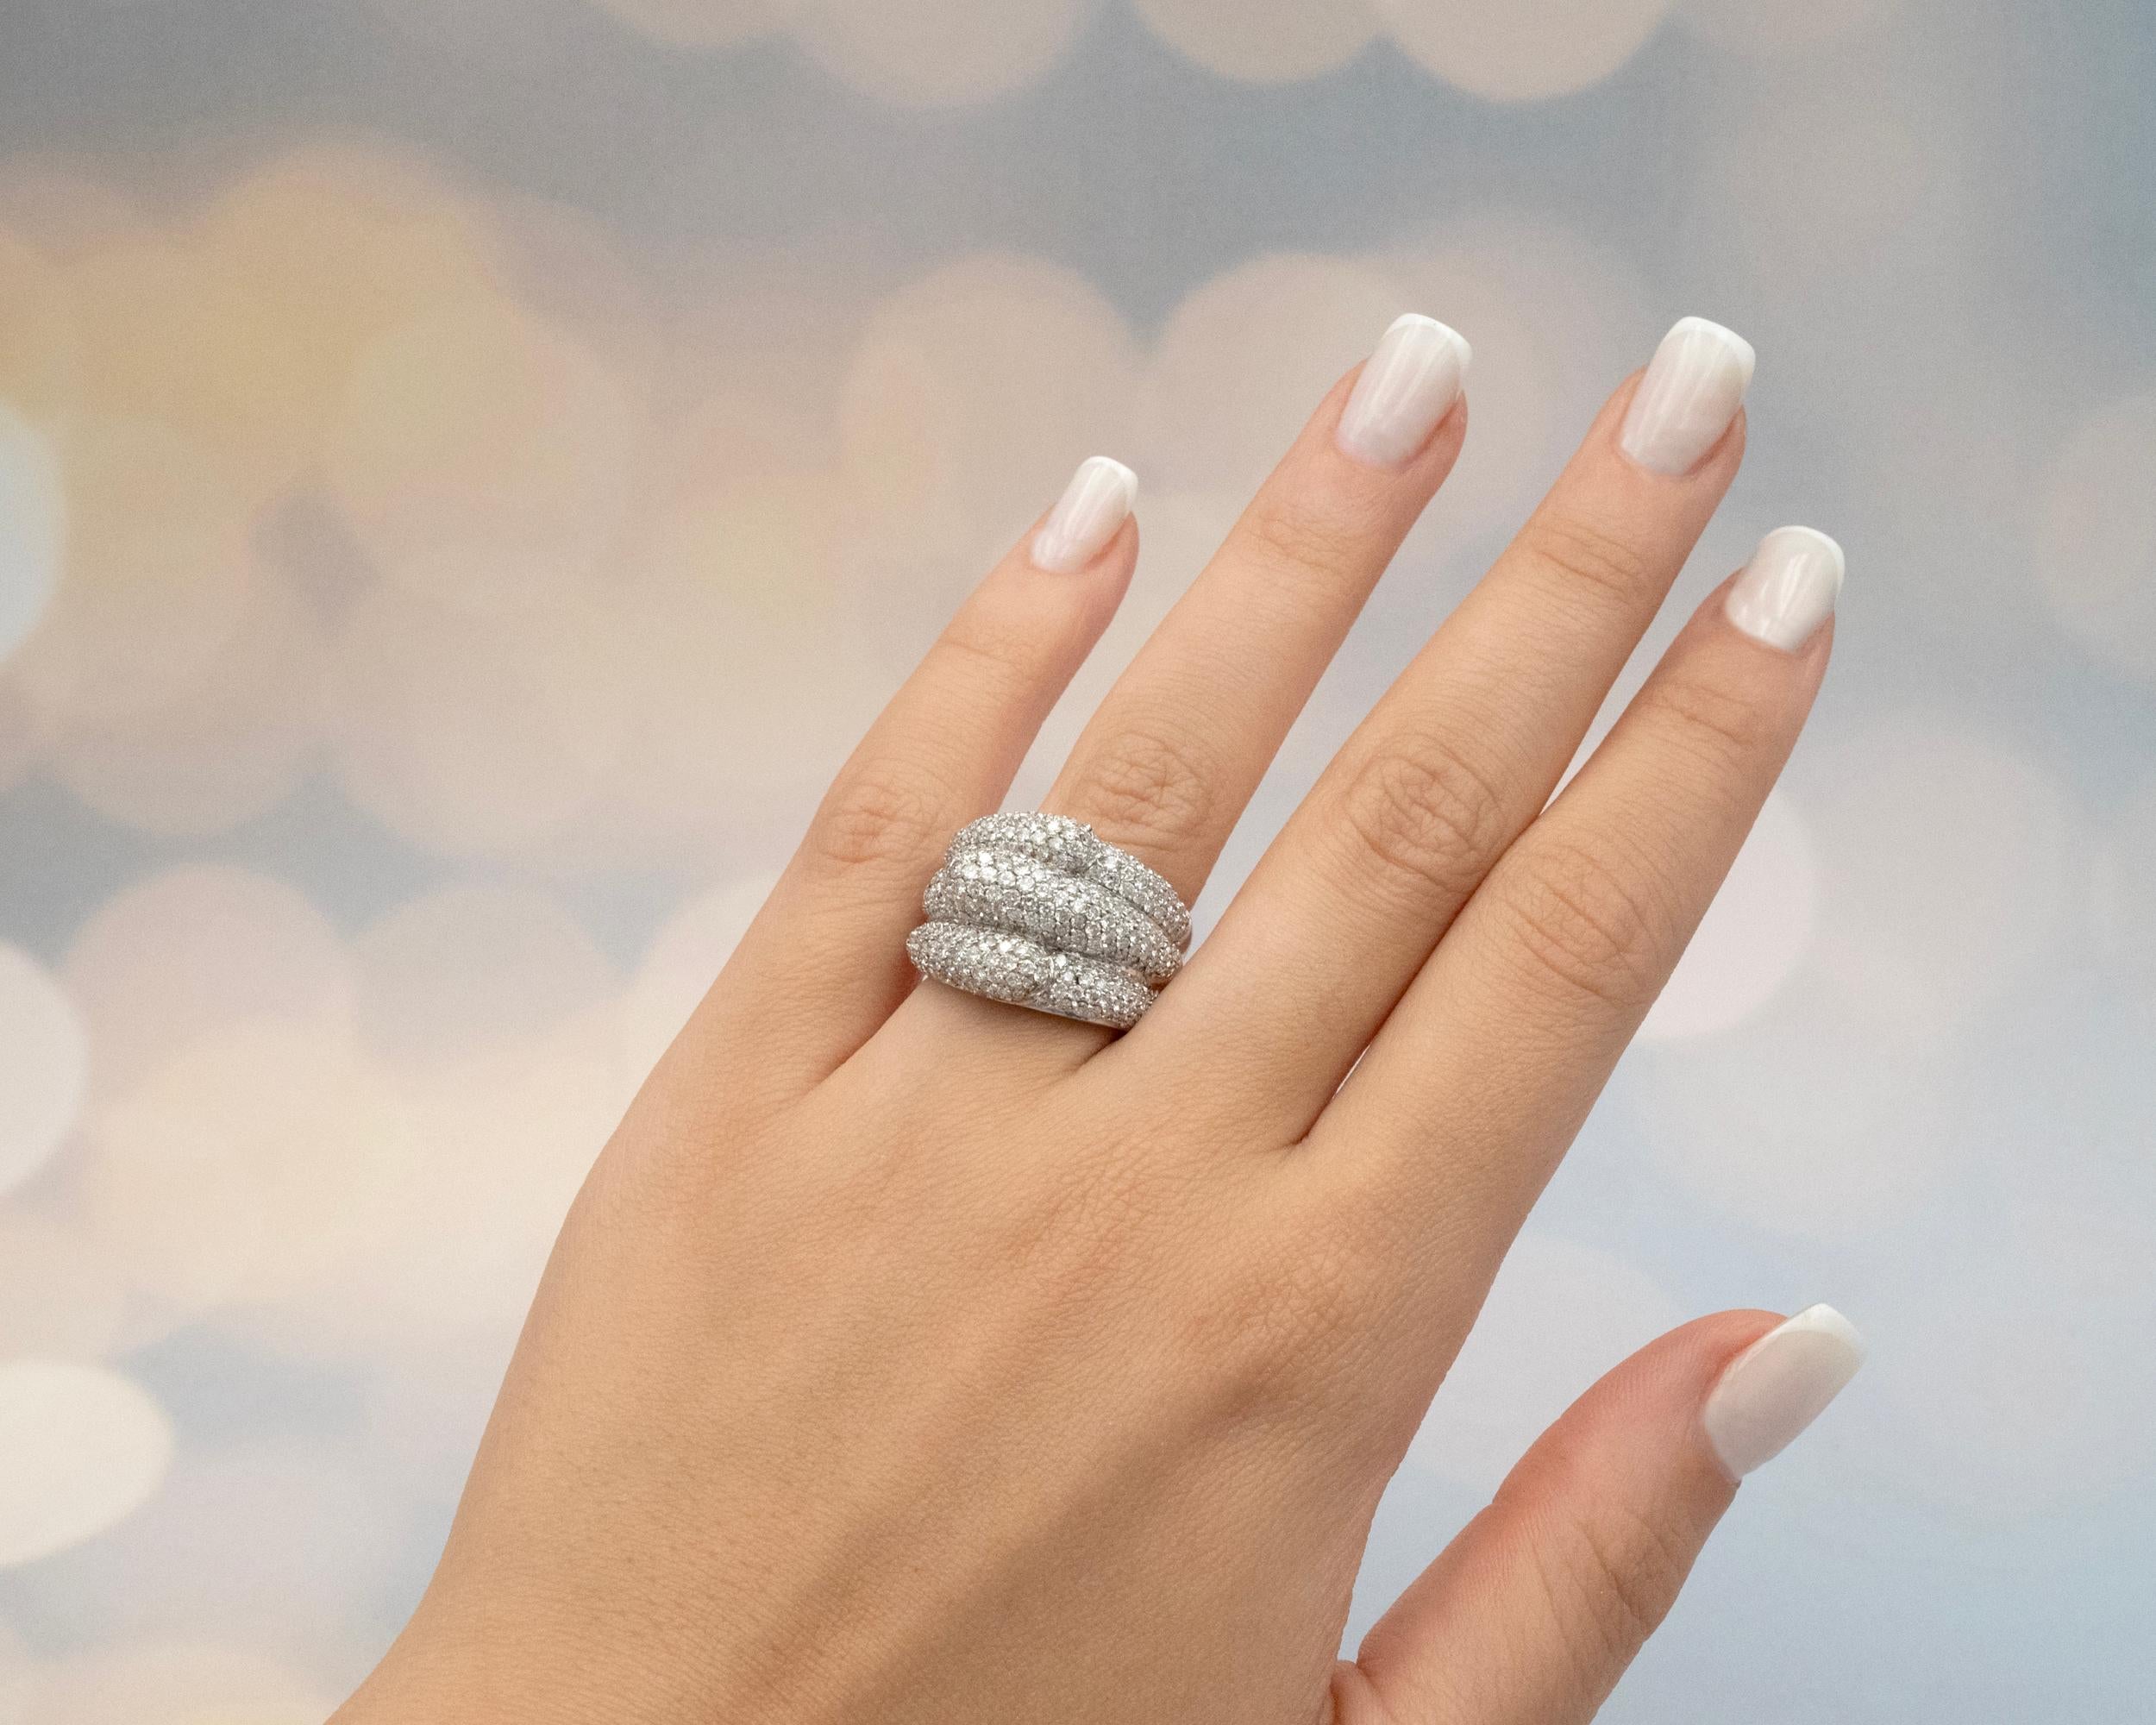 Introducing our stunning Dome Ring in 18 karat white gold, adorned with total of approximately 3.35 carats delicately paving three ridges ( with alternate directions), creating an enchanting sparkle from every angle. 
This extraordinary piece